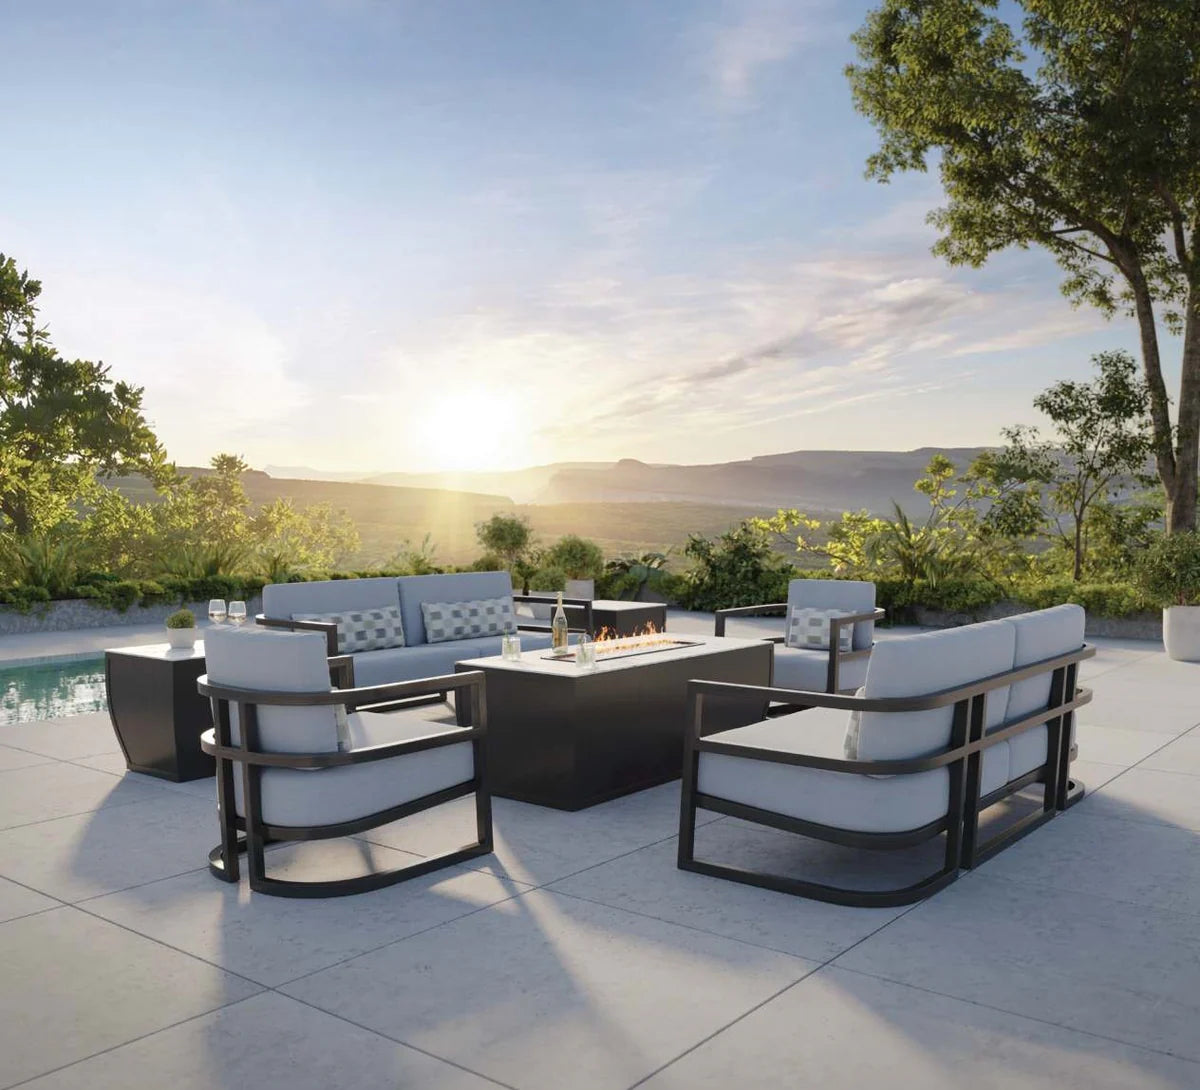 The Long-Term Value of Investing in High-End Patio Furniture